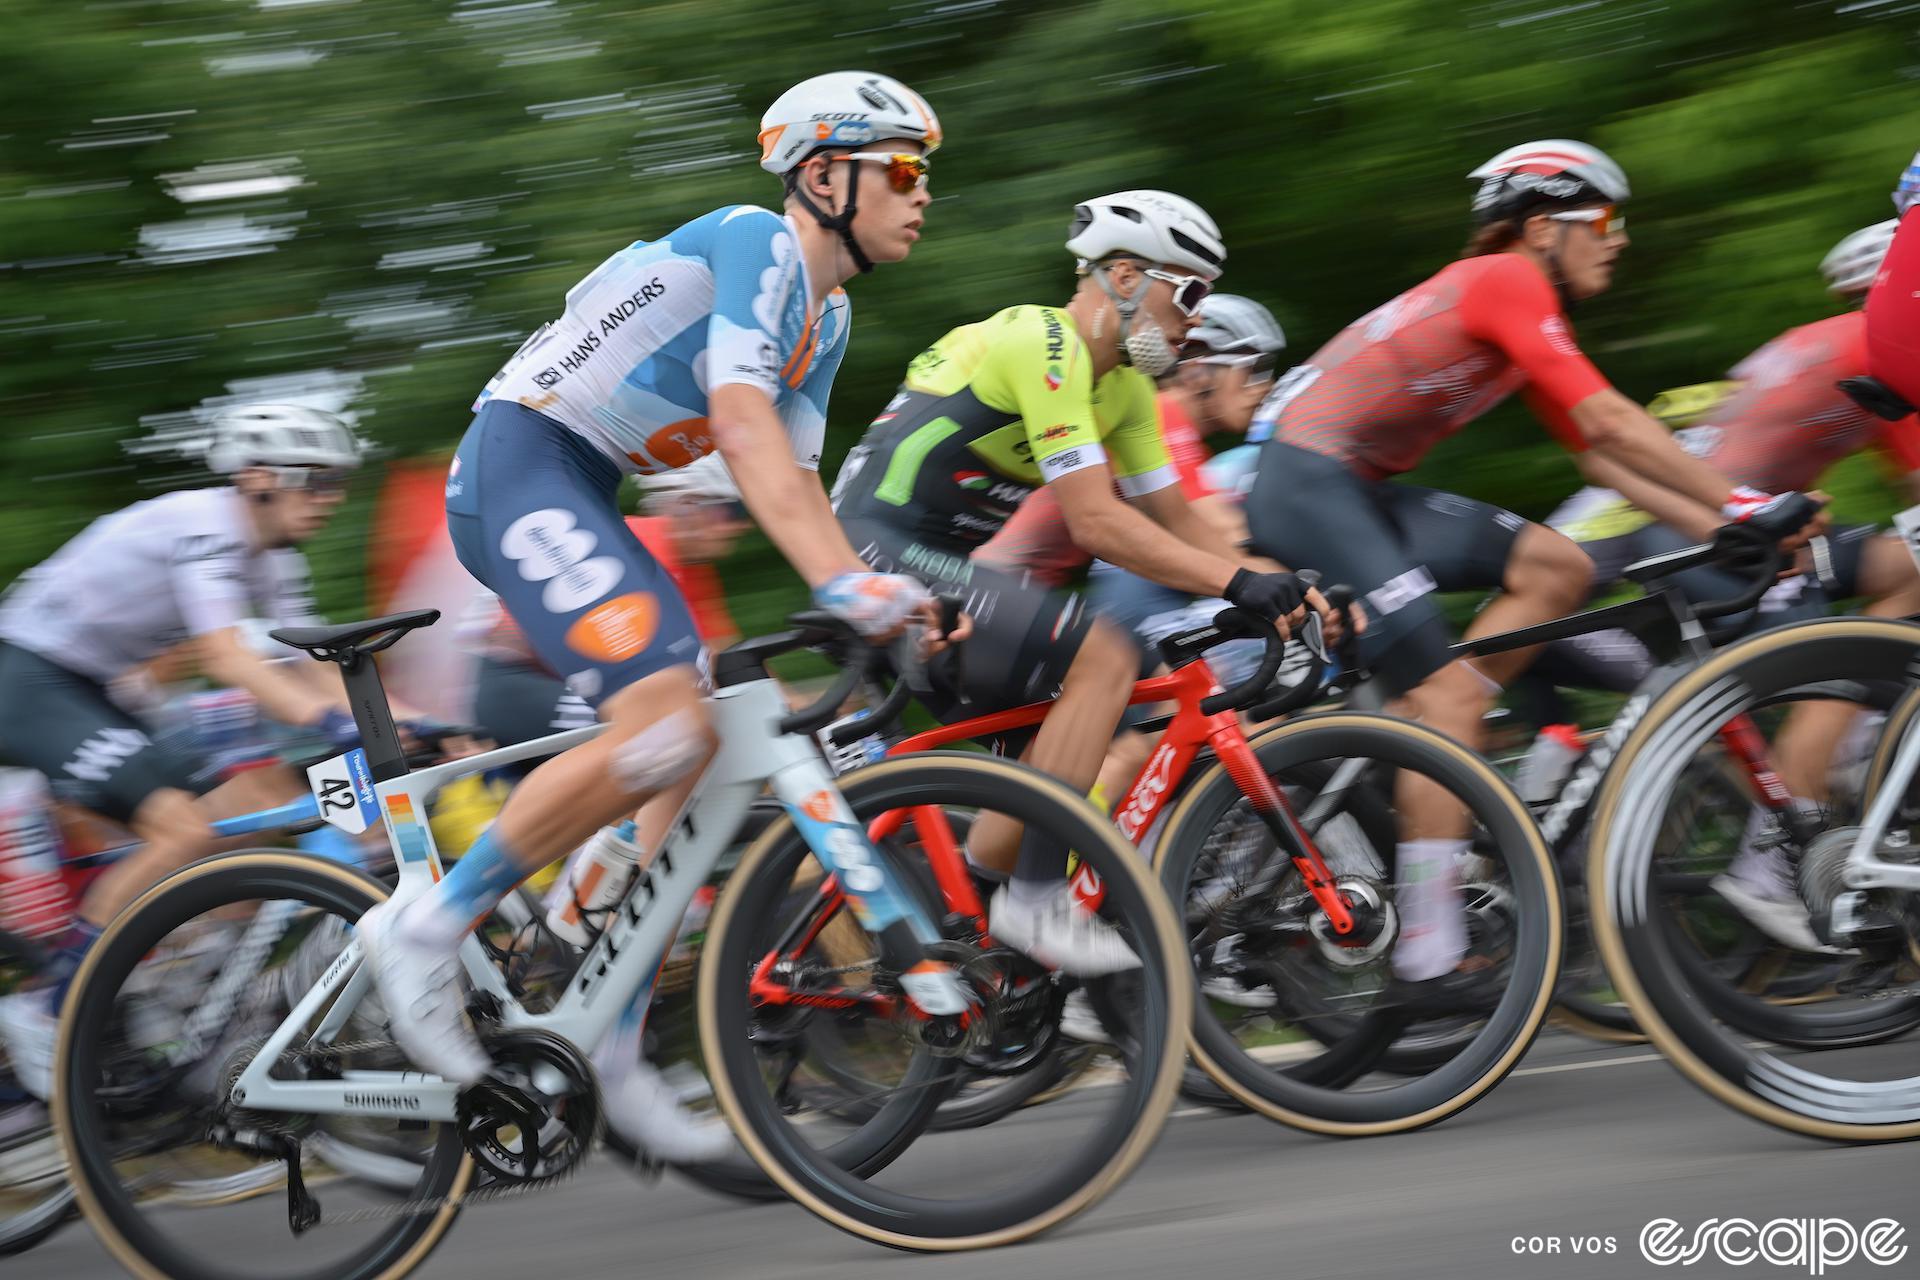 Frank van den Broek climbs in a pack of racers. They're somewhat speed-blurred, but his blue-and-white DSM jersey is in sharp focus.